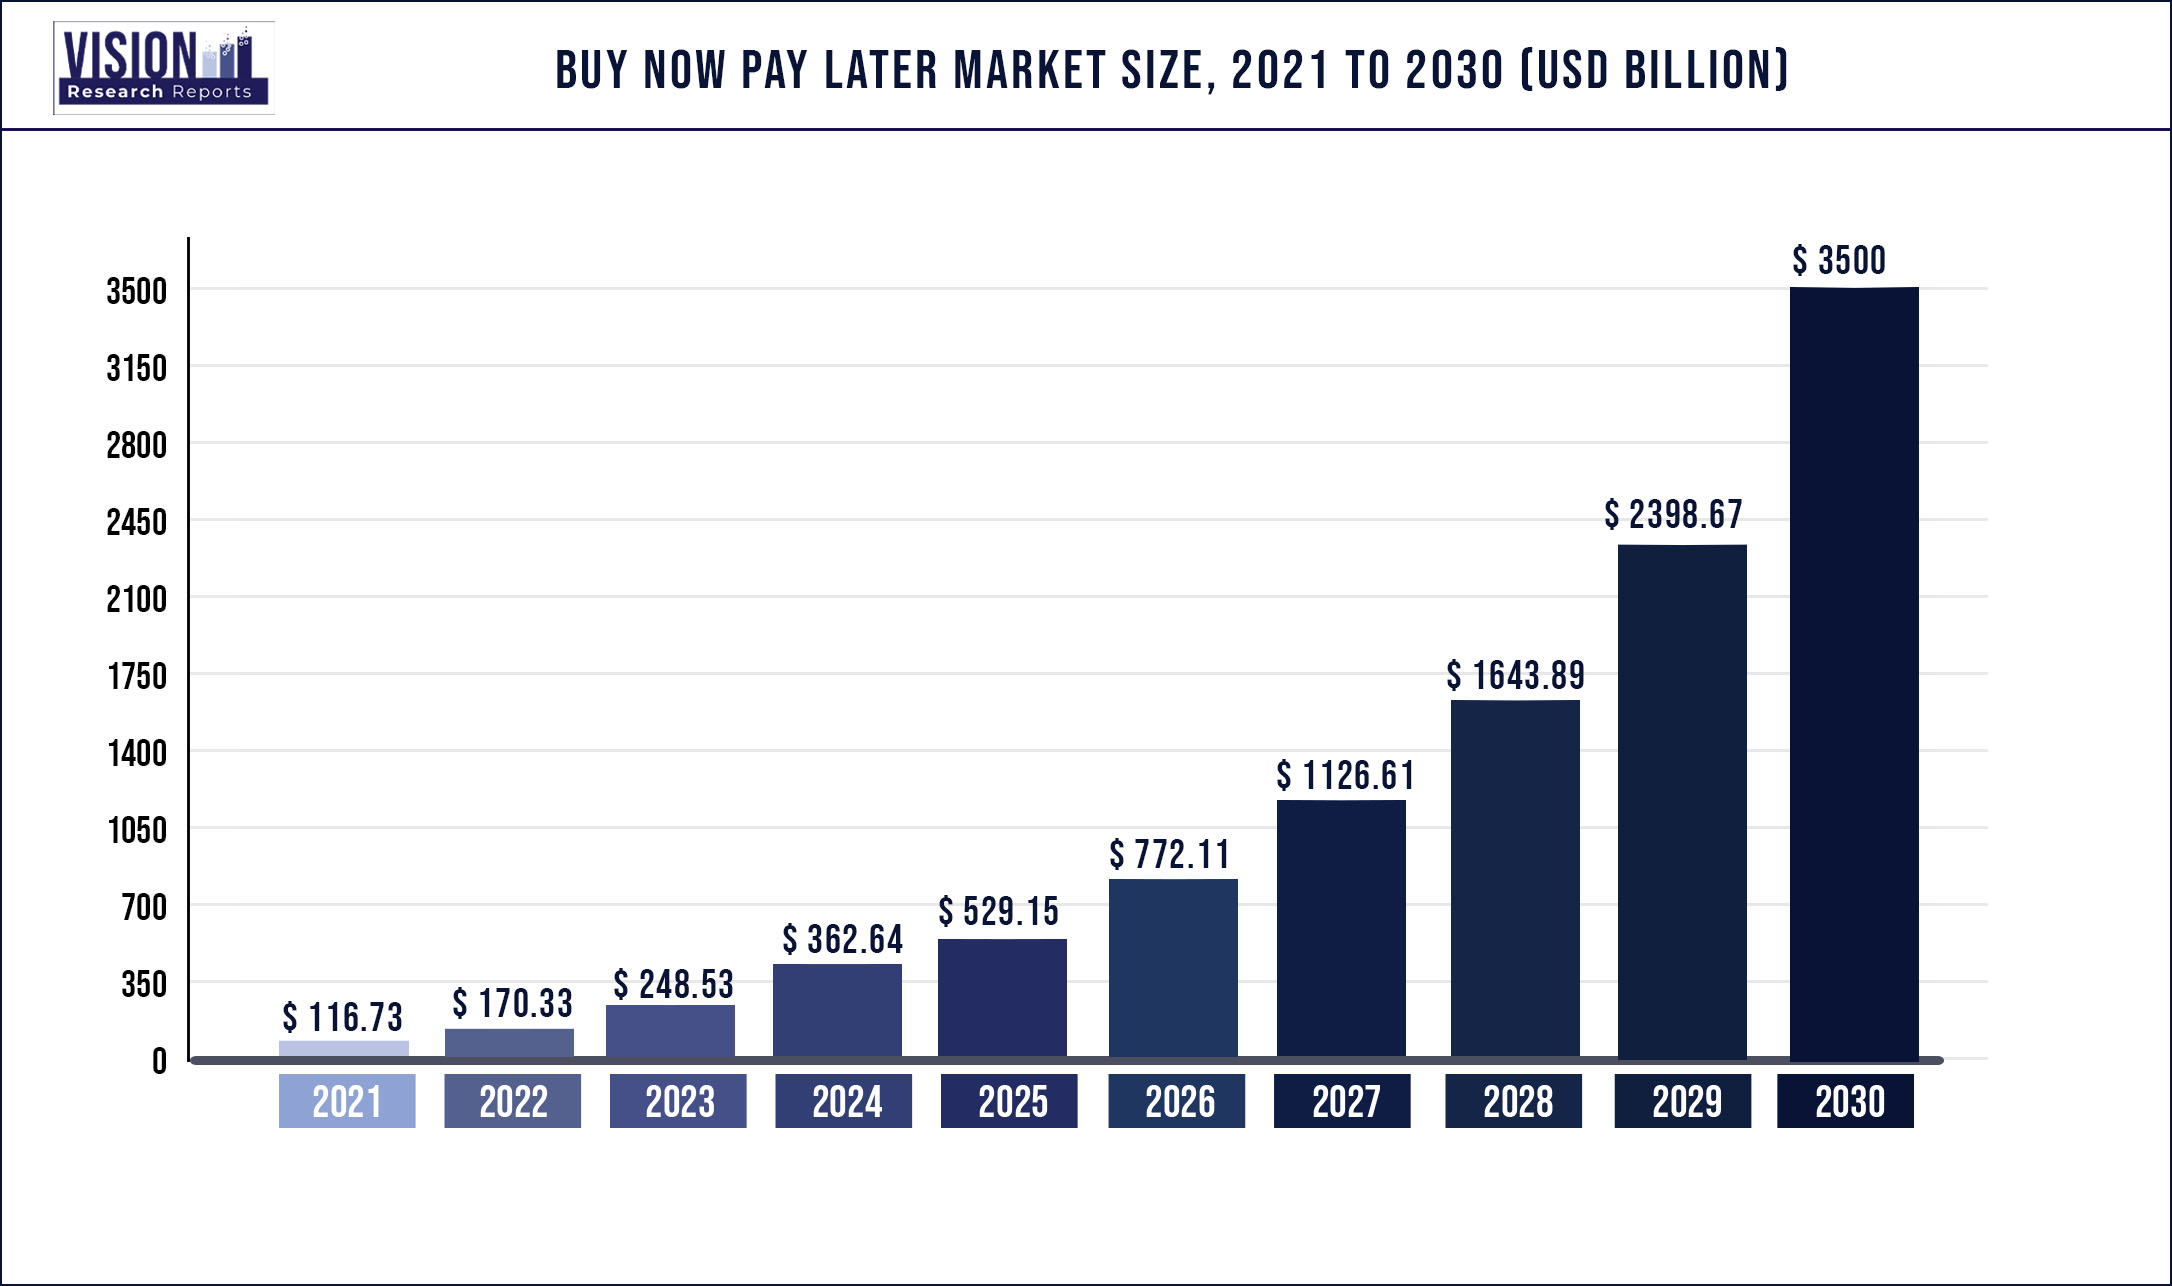 Buy Now Pay Later Market Size 2021 to 2030